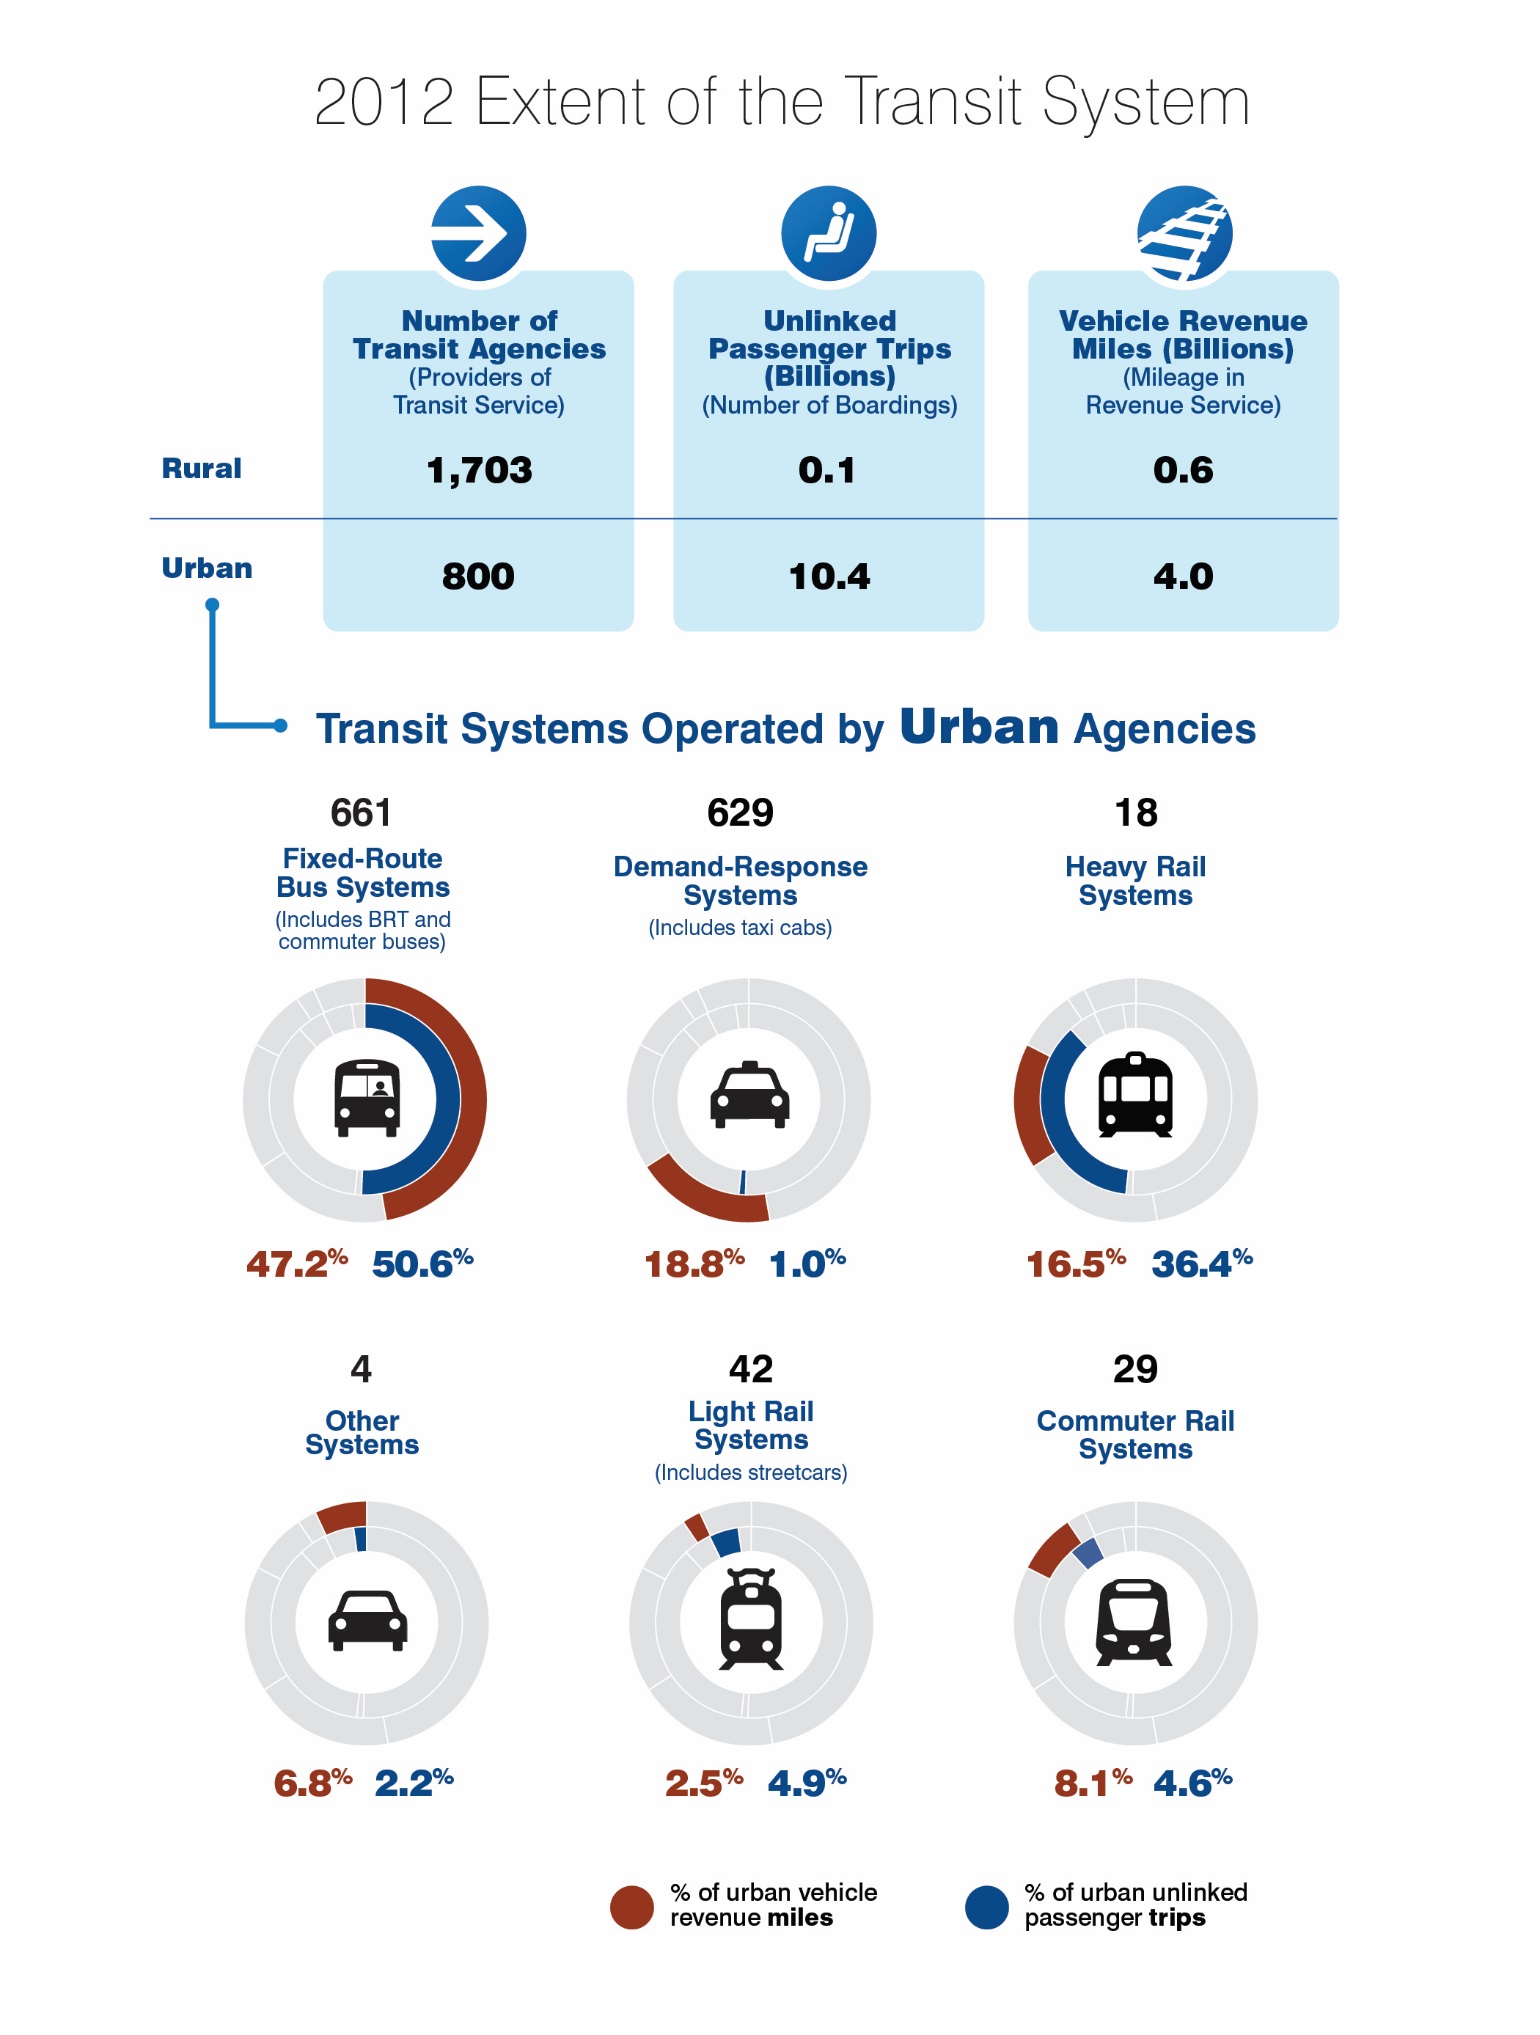 This exhibit illustrates the extent of the transit system in 2012 in urbanized and rural areas. Of the transit agencies that submitted data to the National Transit Database in 2012, 800 provided service to urbanized areas and 1,703 provided service to rural areas. Urban transit operators reported approximately 10.4 billion unlinked passenger trips on 4.0 billion vehicle revenue miles. Rural transit operators reported an additional 0.1 billion unlinked passenger trips and 0.6 billion vehicle revenue miles. Urban agencies operated 661 bus systems (47.2 percent urban vehicle revenue miles and 50.6 percent urban unlinked passenger trips), 629 demand-response systems (18.8 percent urban vehicle revenue miles and 1.0 percent urban unlinked passenger trips), 18 heavy rail systems (16.5 percent urban vehicle revenue miles and 36.4 percent urban unlinked passenger trips), 42 light rail systems (2.5 percent urban vehicle revenue miles and 4.9 percent urban unlinked passenger trips), 29 commuter rail systems (8.1 percent urban vehicle revenue miles and 4.6 percent urban unlinked passenger trips), and 4 other systems (6.8 percent urban vehicle revenue miles and 2.2 percent urban unlinked passenger trips). 